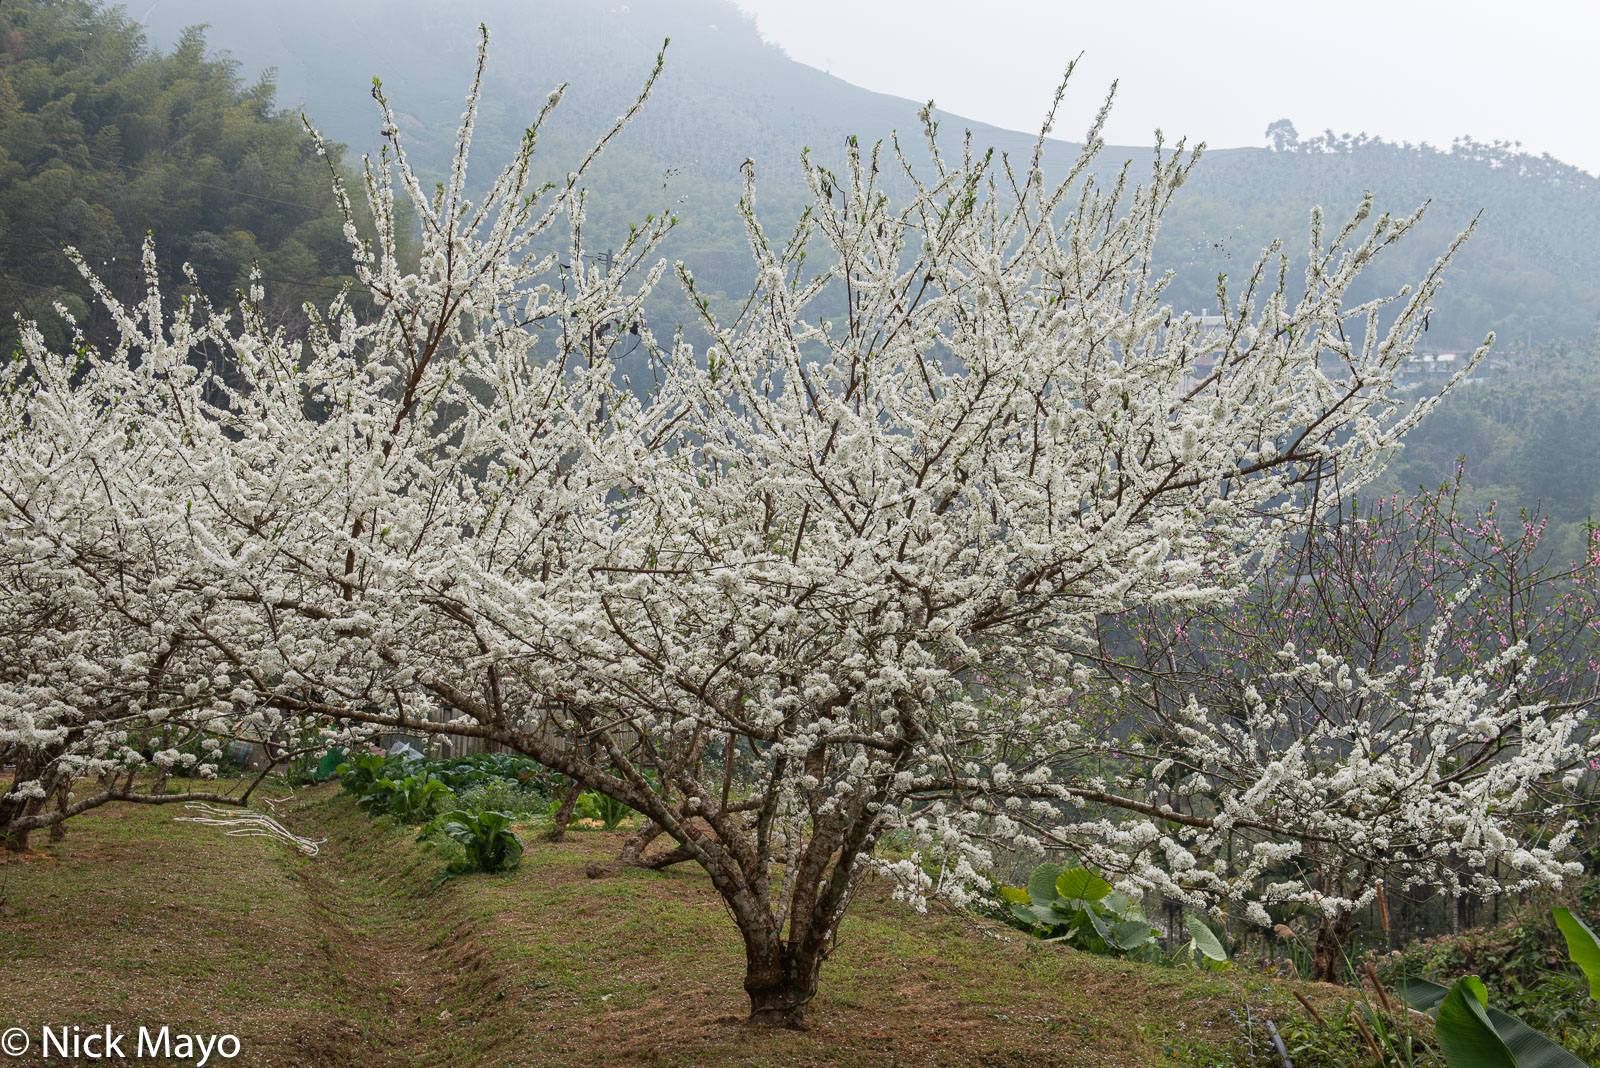 A pear tree in blossom at Jiaoliping in Chiayi County.